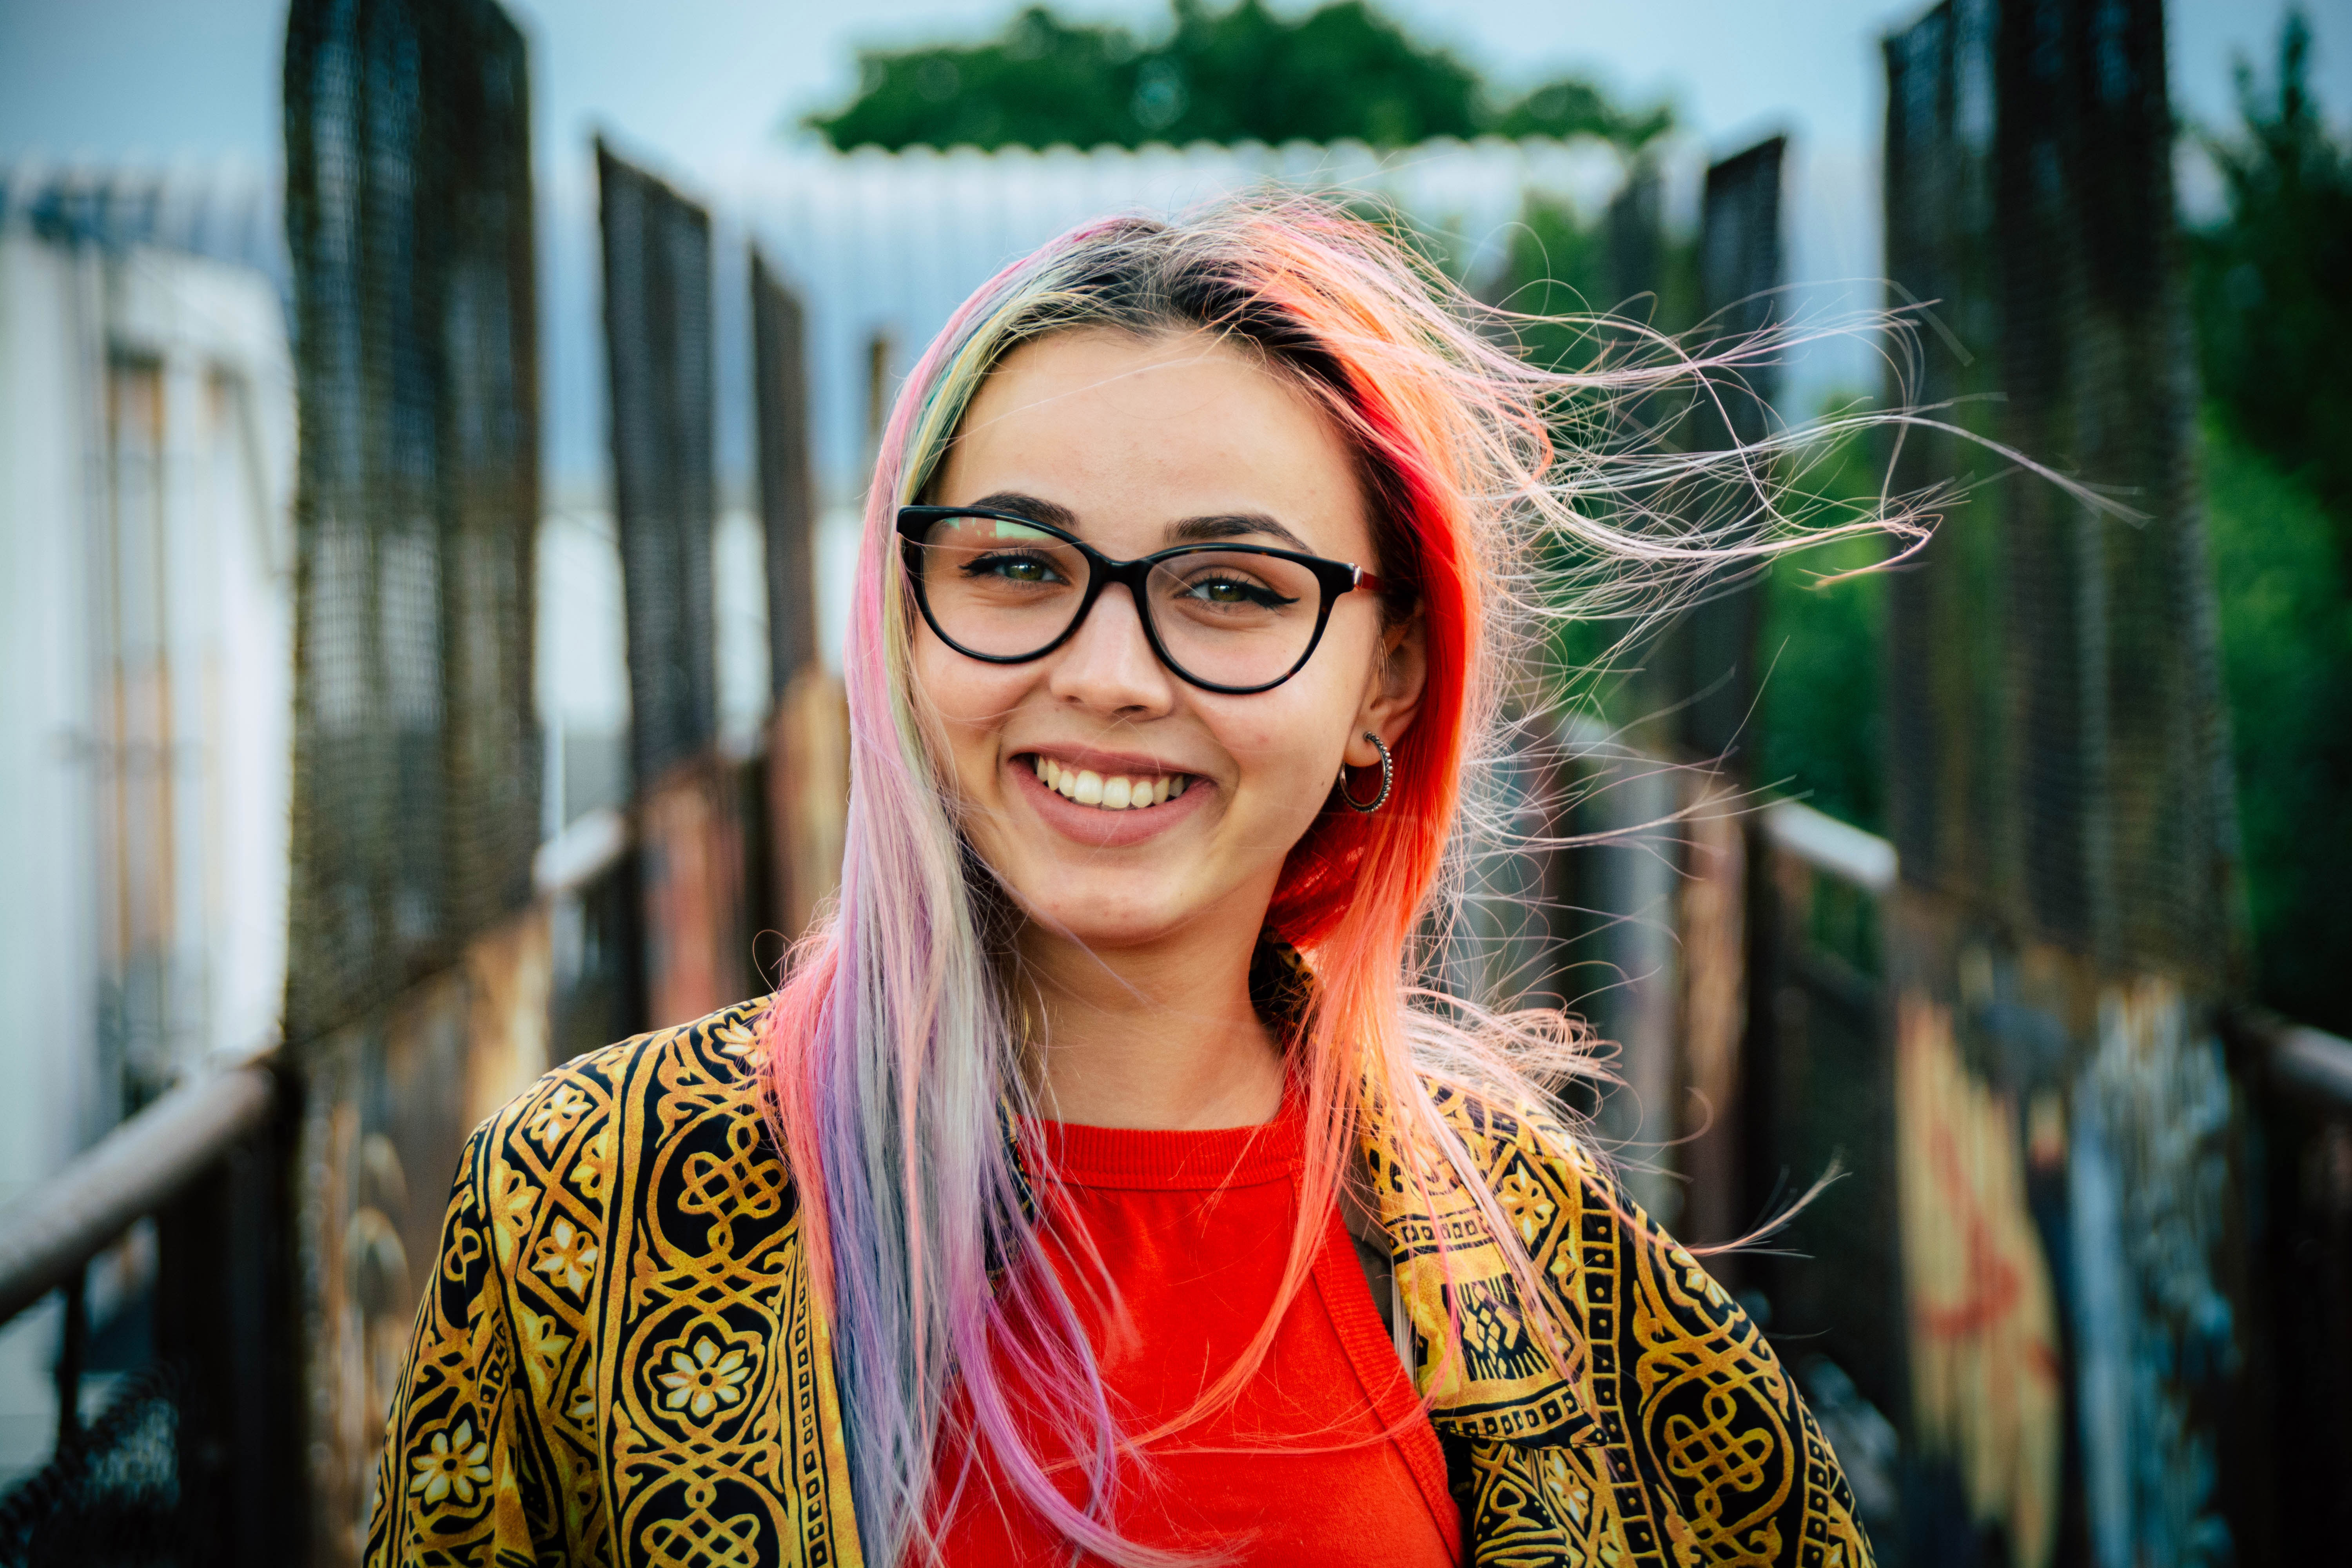 Young woman with glasses and bright multicoloured hair.